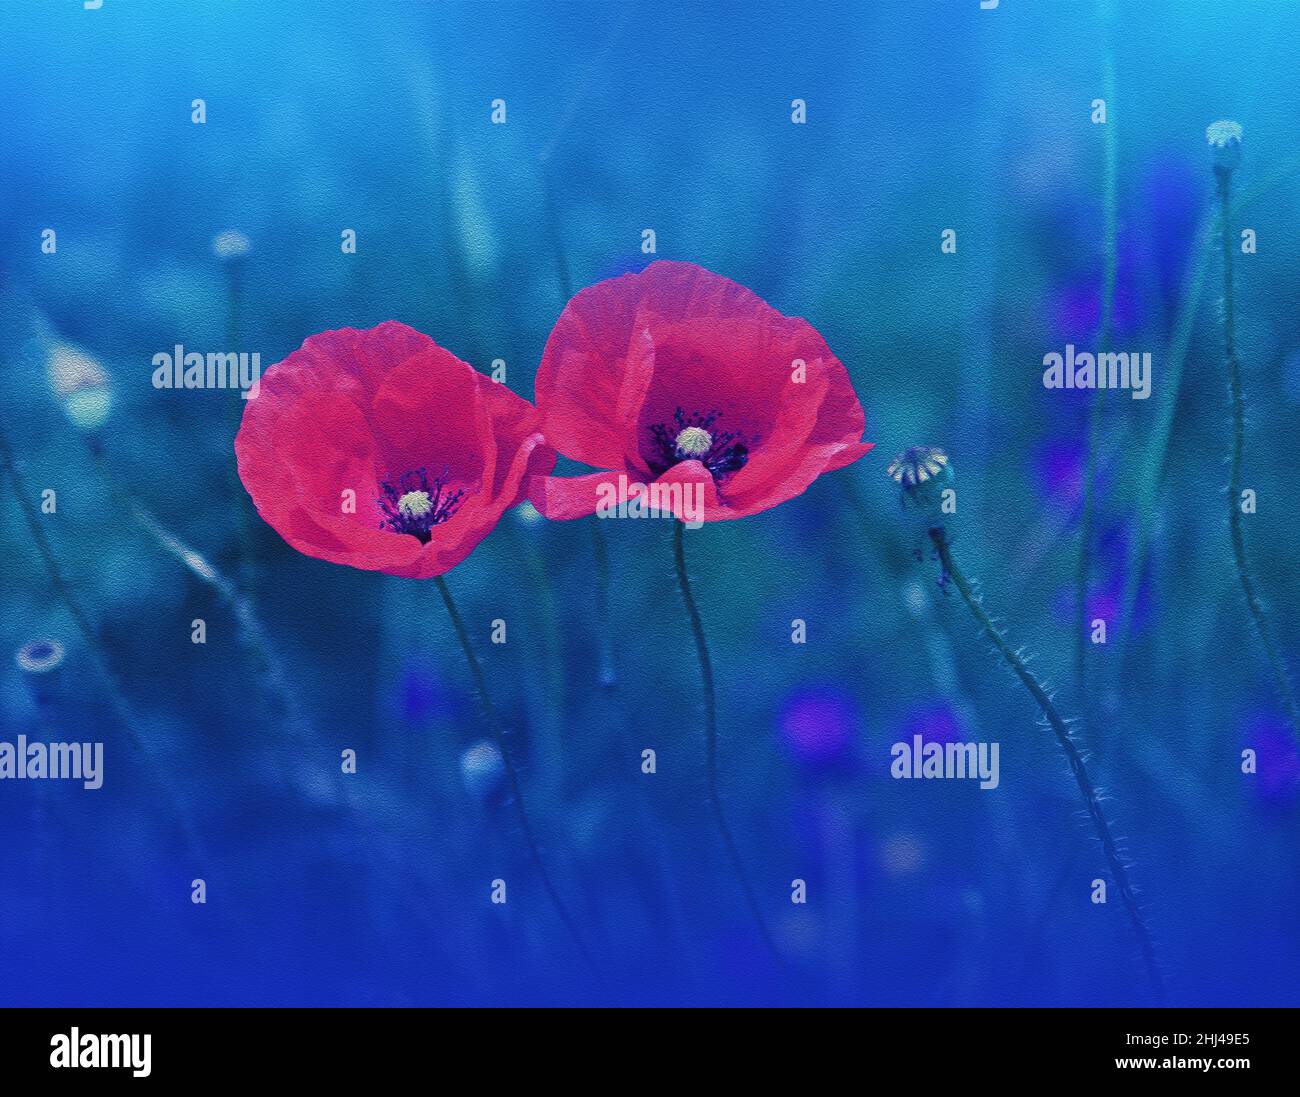 Beautiful Macro Photo.Red Poppy Flower.Floral Art Design.Close up Photography.Conceptual Abstract Image.Blue Nature Background.Fantasy Art.Poppies. Stock Photo